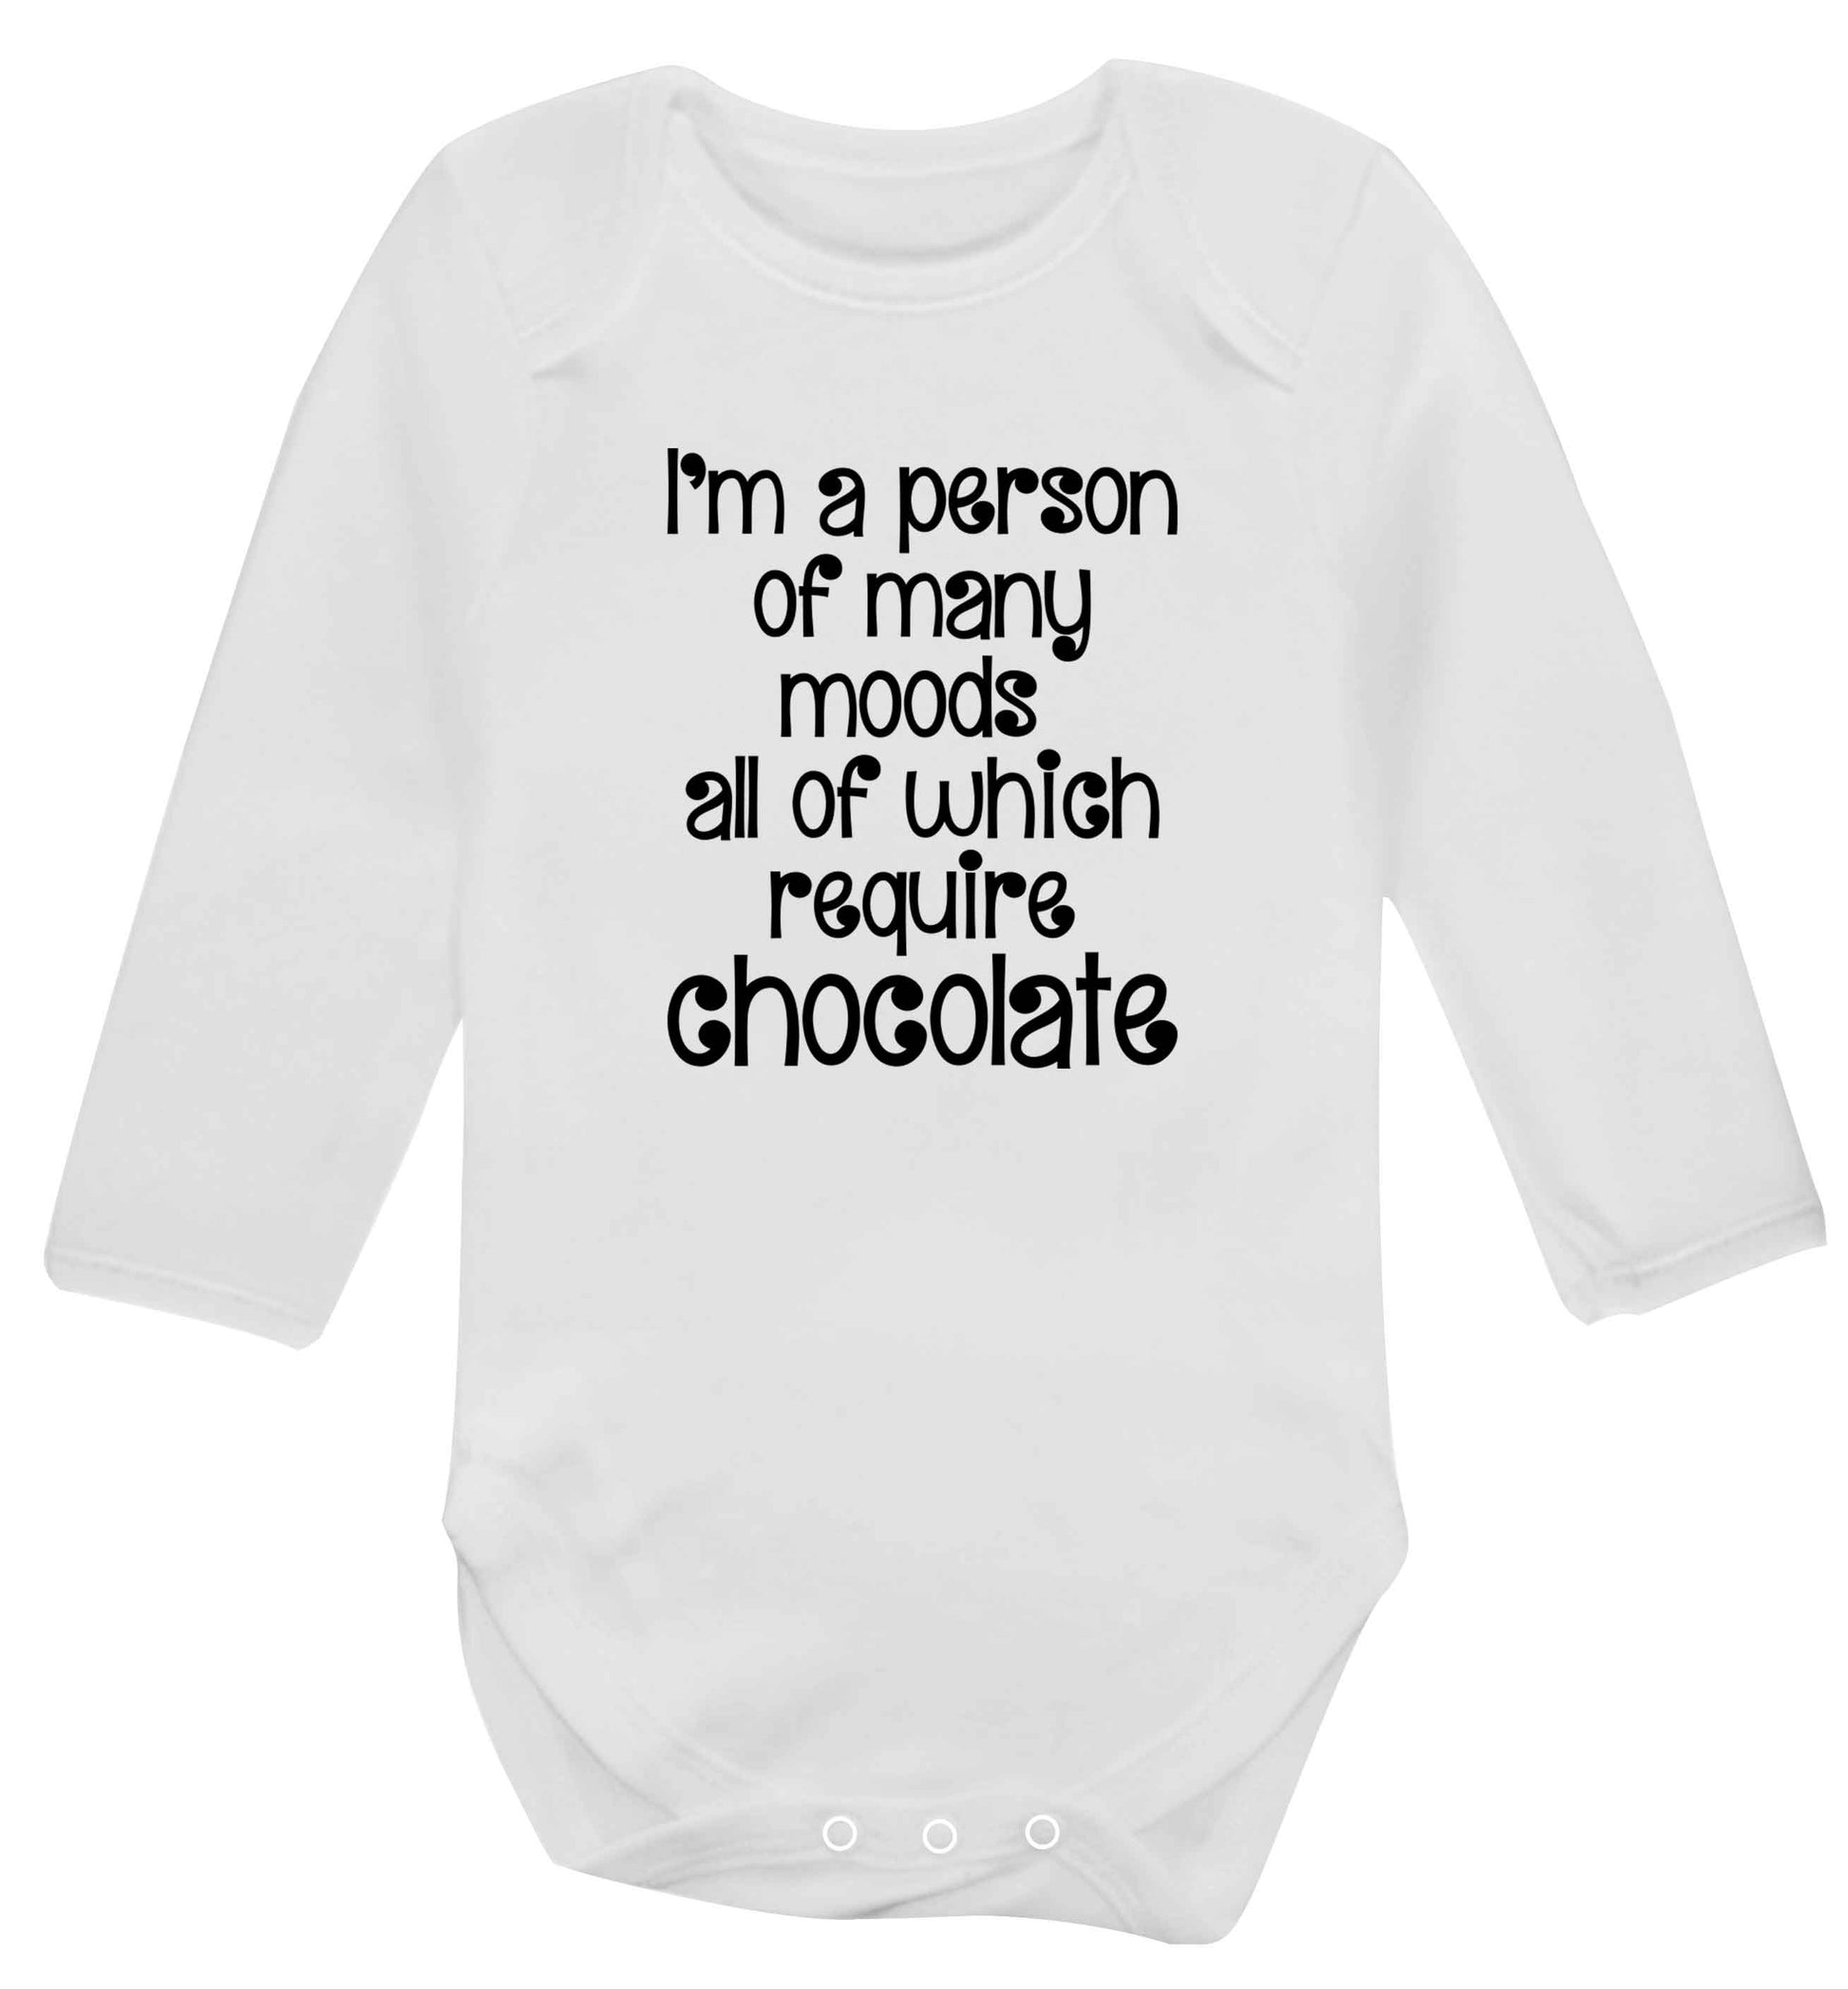 funny gift for a chocaholic! I'm a person of many moods all of which require chocolate baby vest long sleeved white 6-12 months